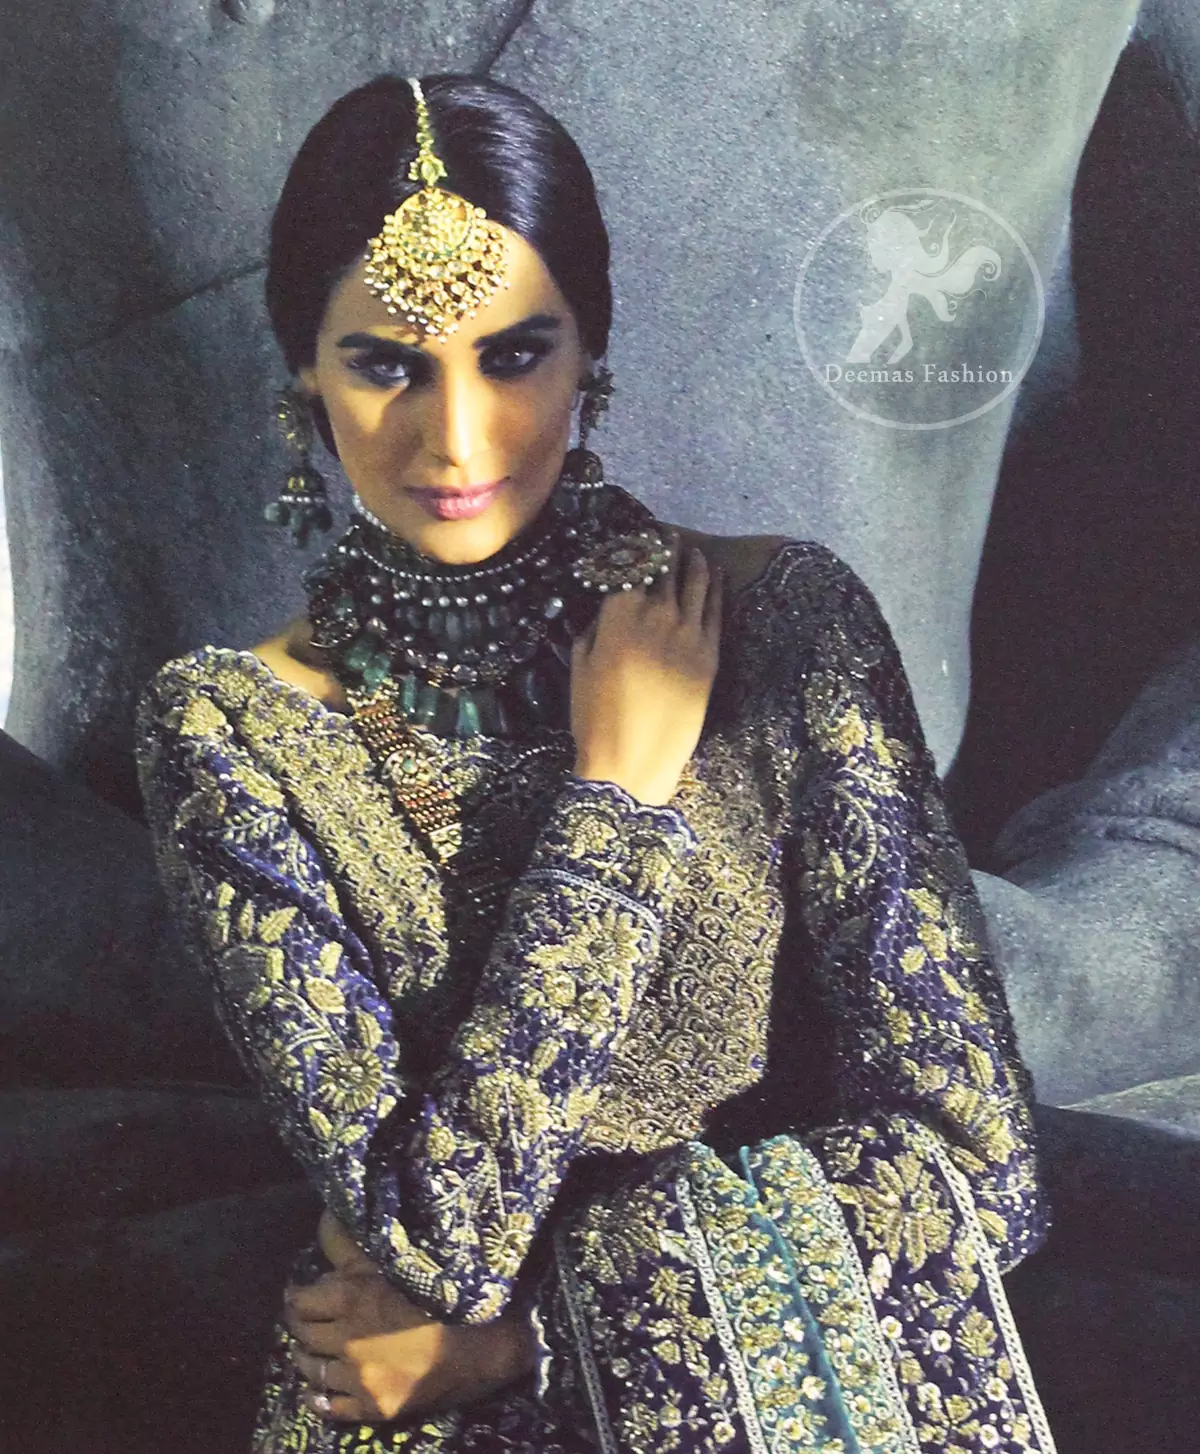 Violet Blue Blouse is of velvet fabric. It is heavy embellished ful sleeves blouse featuring antique and golden shaded kora, dabka, resham, naqshi, pearls, crystals and swarovski. Blouse is fully scalloped with blue bayoux resham outline. sleeves are adorned with floral work and sprinkling sequins/naqshi on it, while bodice having crossing heavy pattern all over it. It comes with raw silk lehengha which is adorned with block printing. It is artistically coordinated with blue bayoux dupatta which is adorned with fully embellished appliqued borders. Borders are accompnied by delicate work along its internal sides. There are four embellished heavy flowers on corners and small floral pattern all over it.